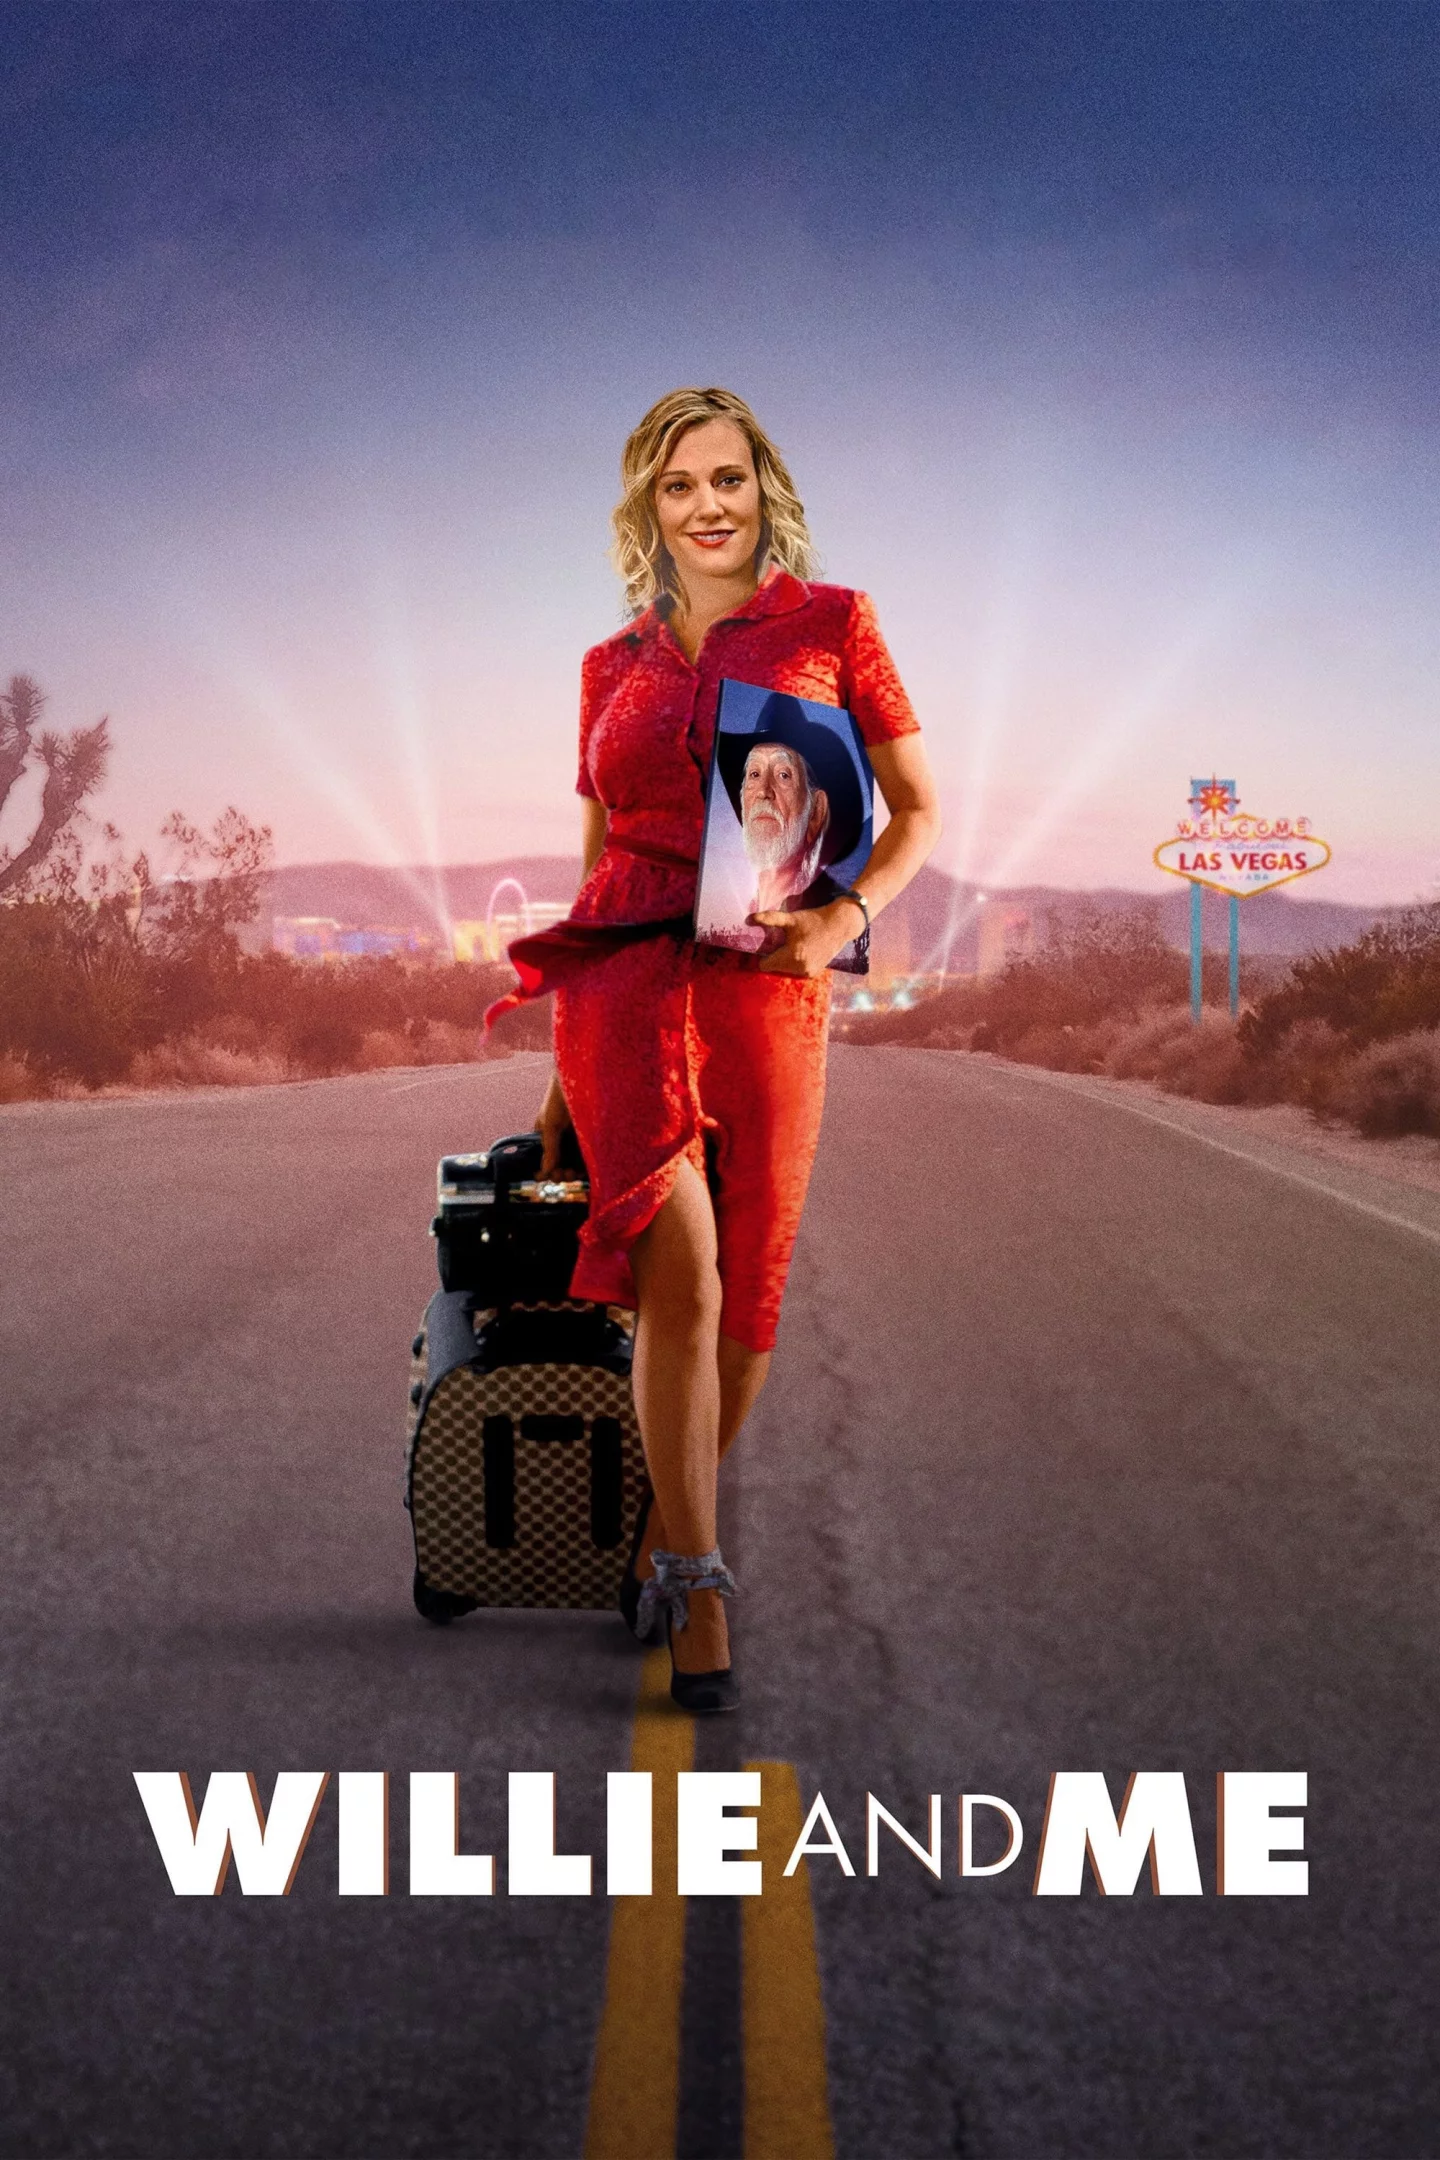 Photo 1 du film : Willie and Me